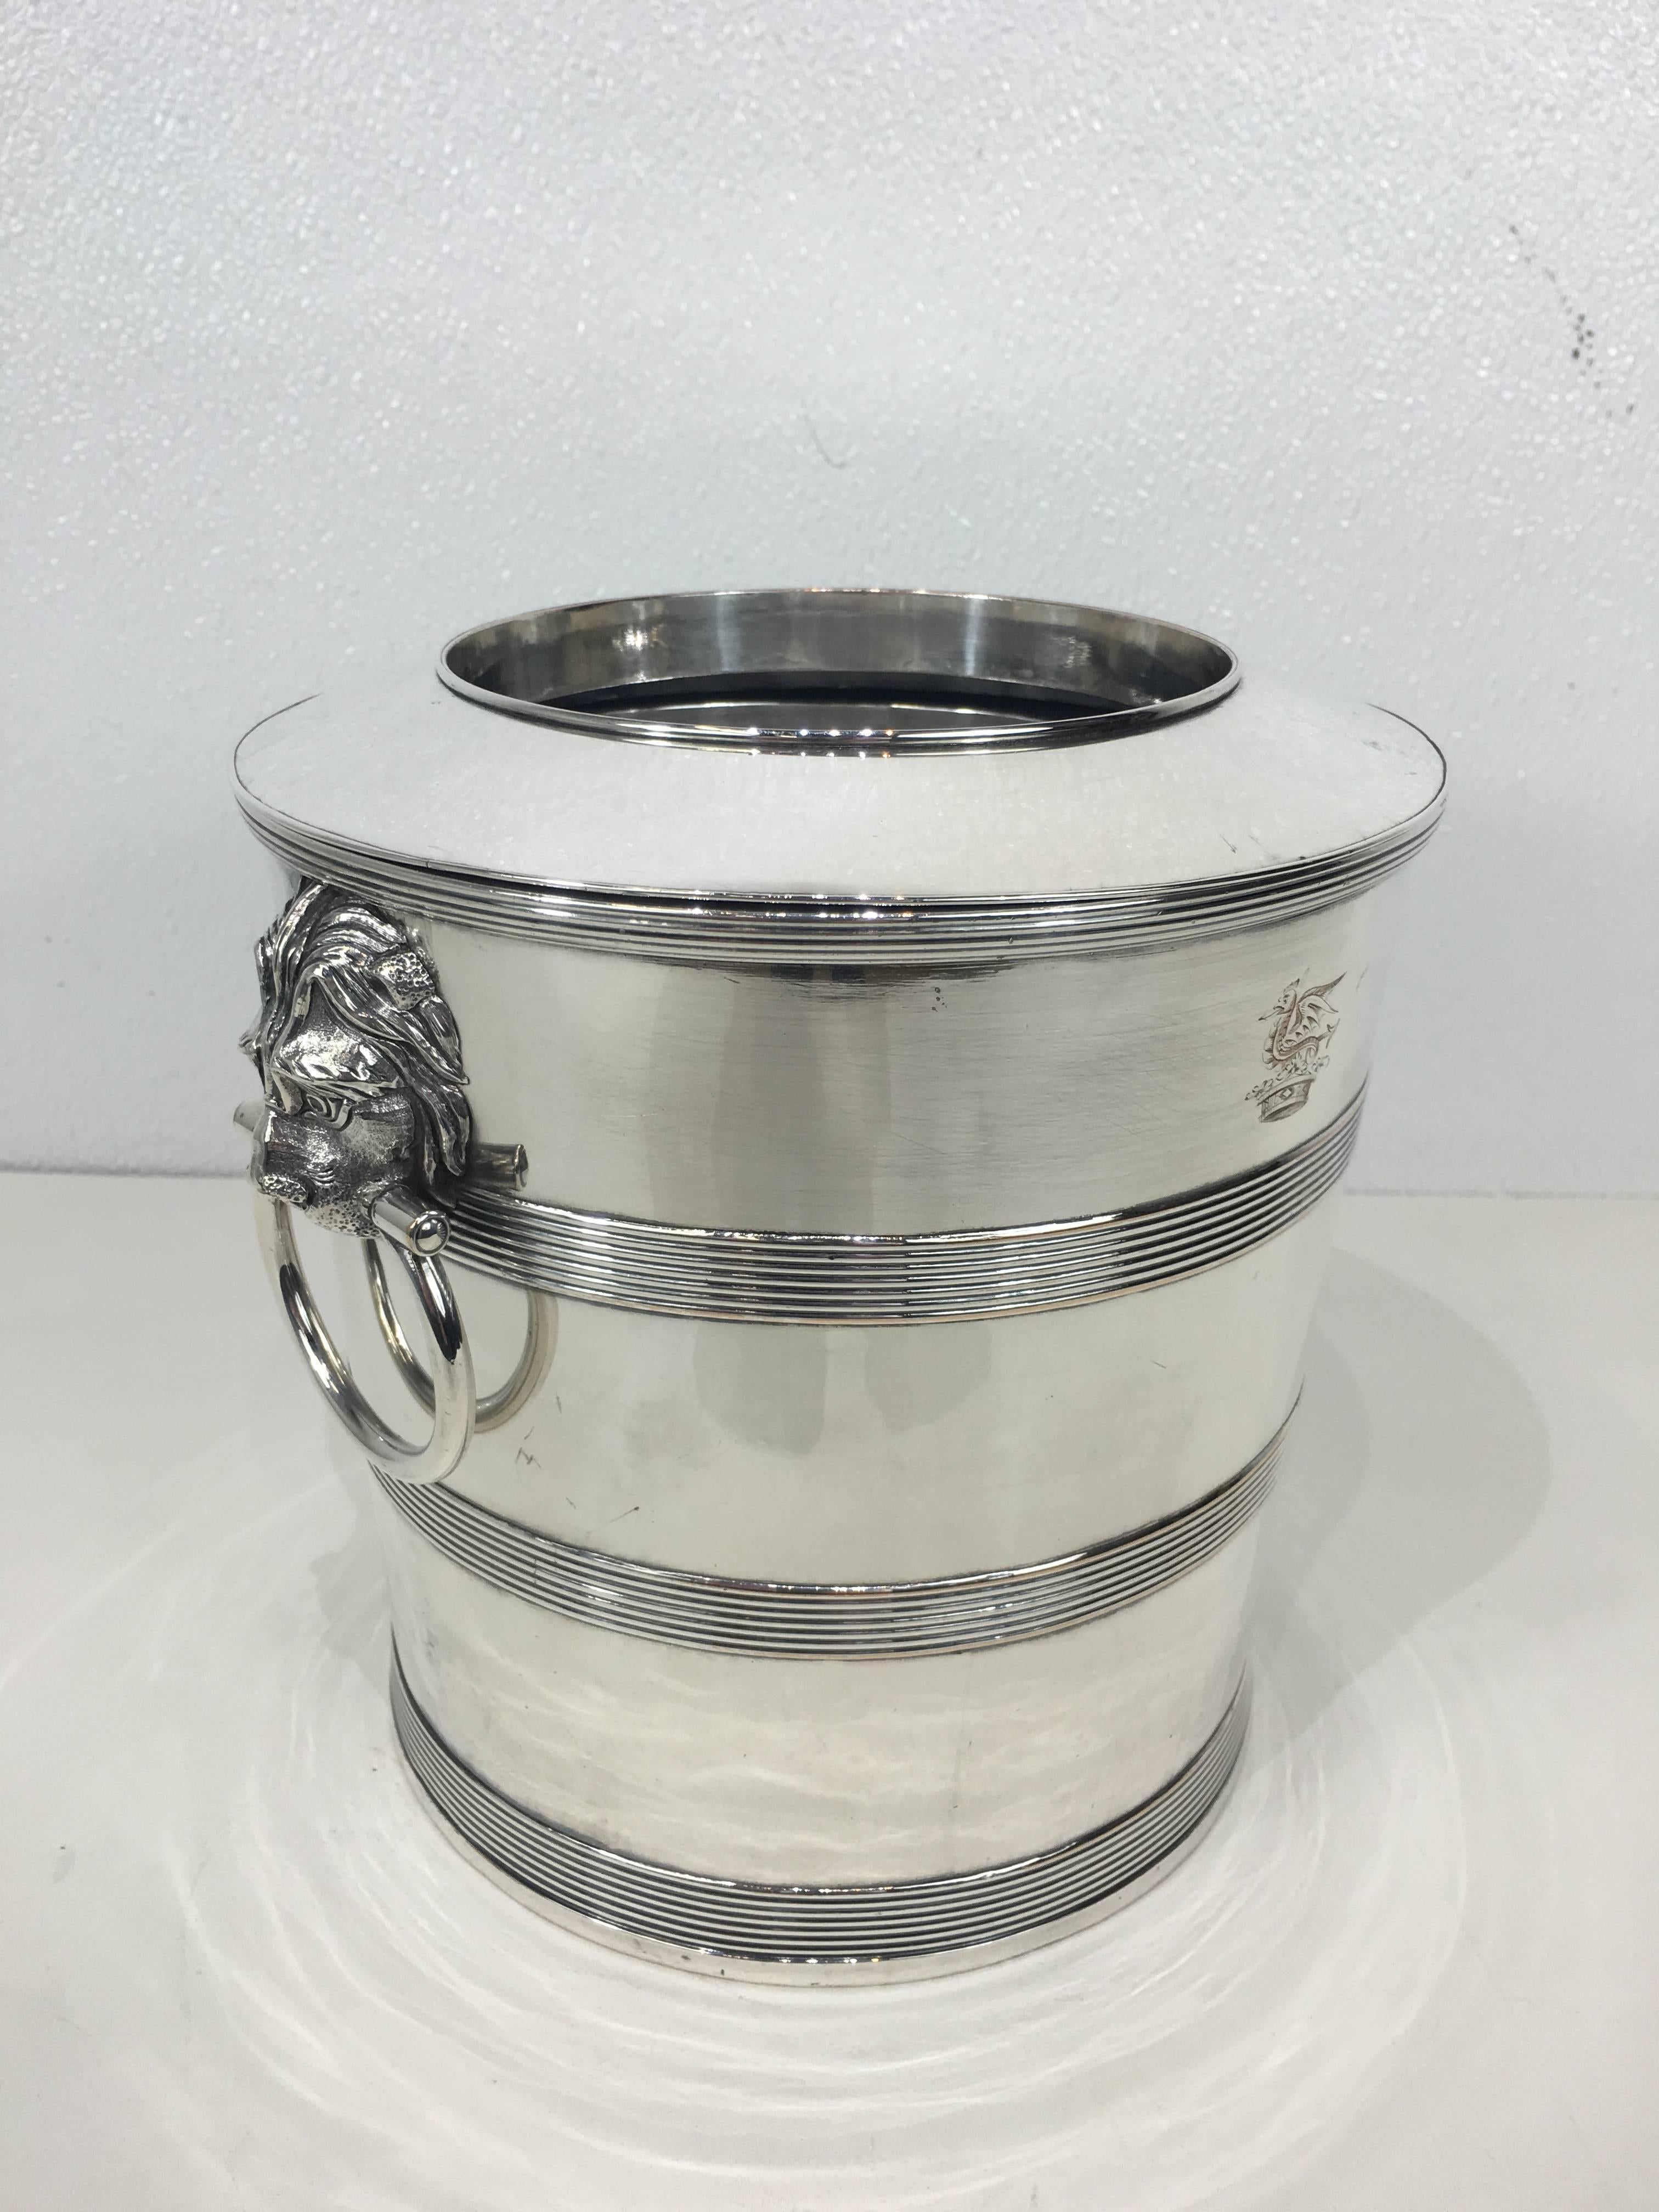 Regency Sheffield plated wine bucket of pail form with removable liner and twin lion handles, engraved with family crest of a Dragon & Crown.

This early 19th century wine bucket has a Middle-Ages heraldic crest of the Dragon and Crown.
The